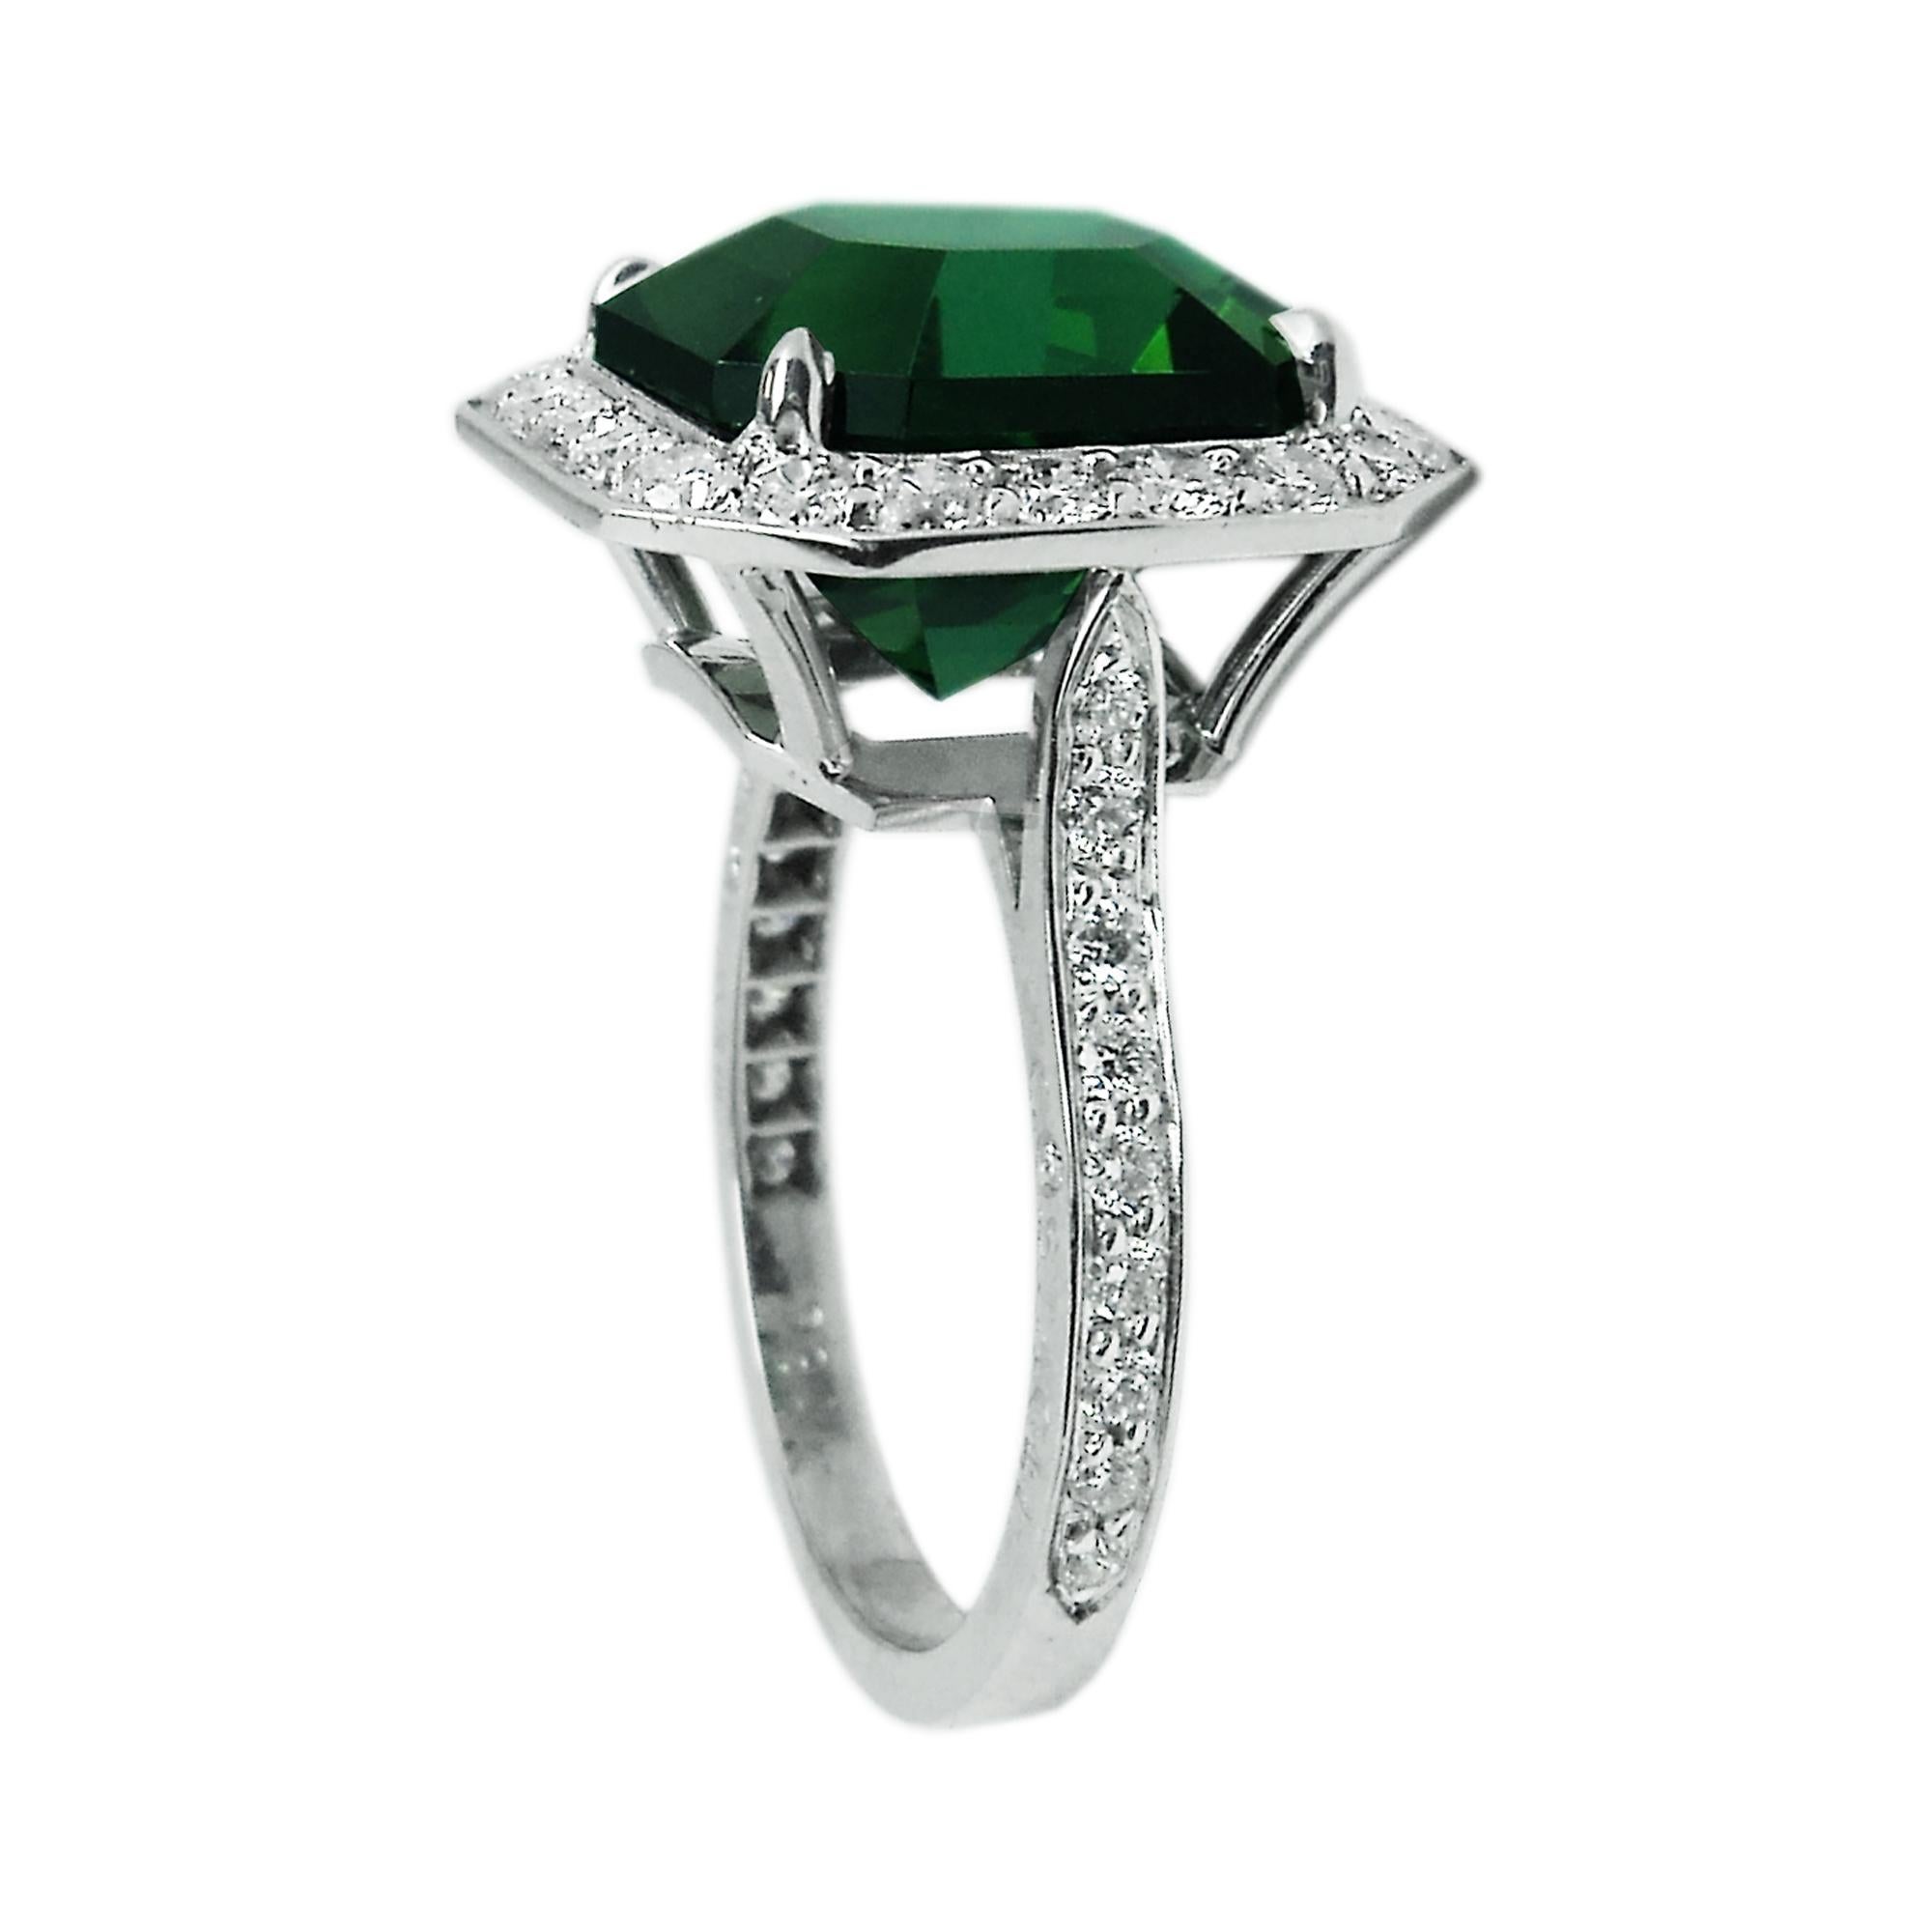 18 karat white gold ring set with an exquisite Asscher cut green tourmaline and round, brilliant diamonds. 

This unconventional tourmaline ring is a shining example of Paolo's expertise. Gemstone engagement rings are the perfect alternative to the